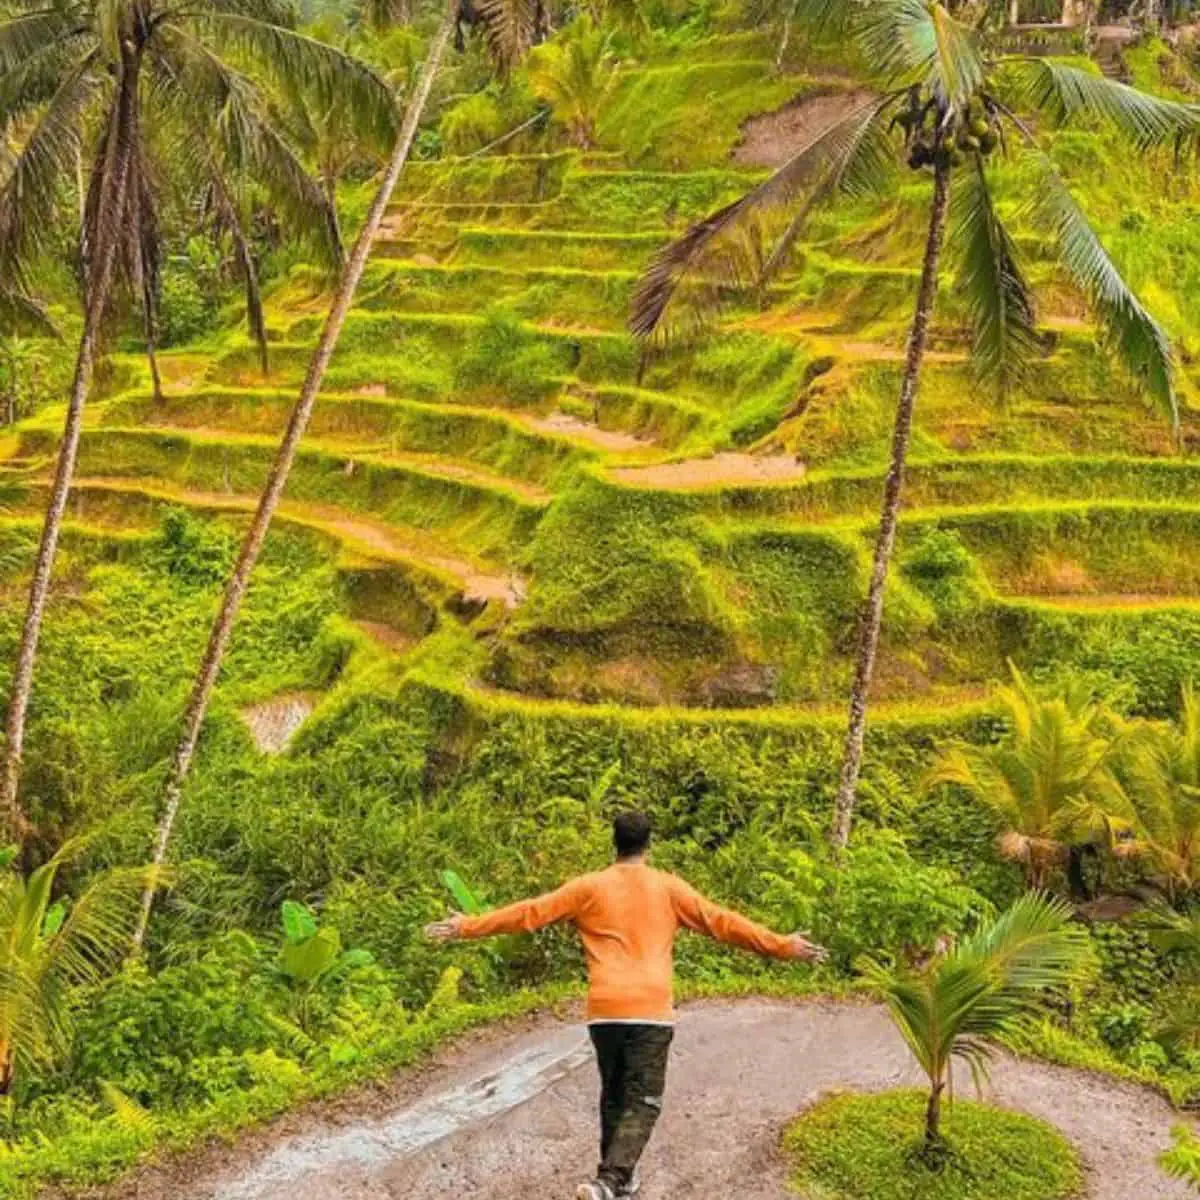 A man in orange jacket enjoying the view of Tegallalang Rice Fields